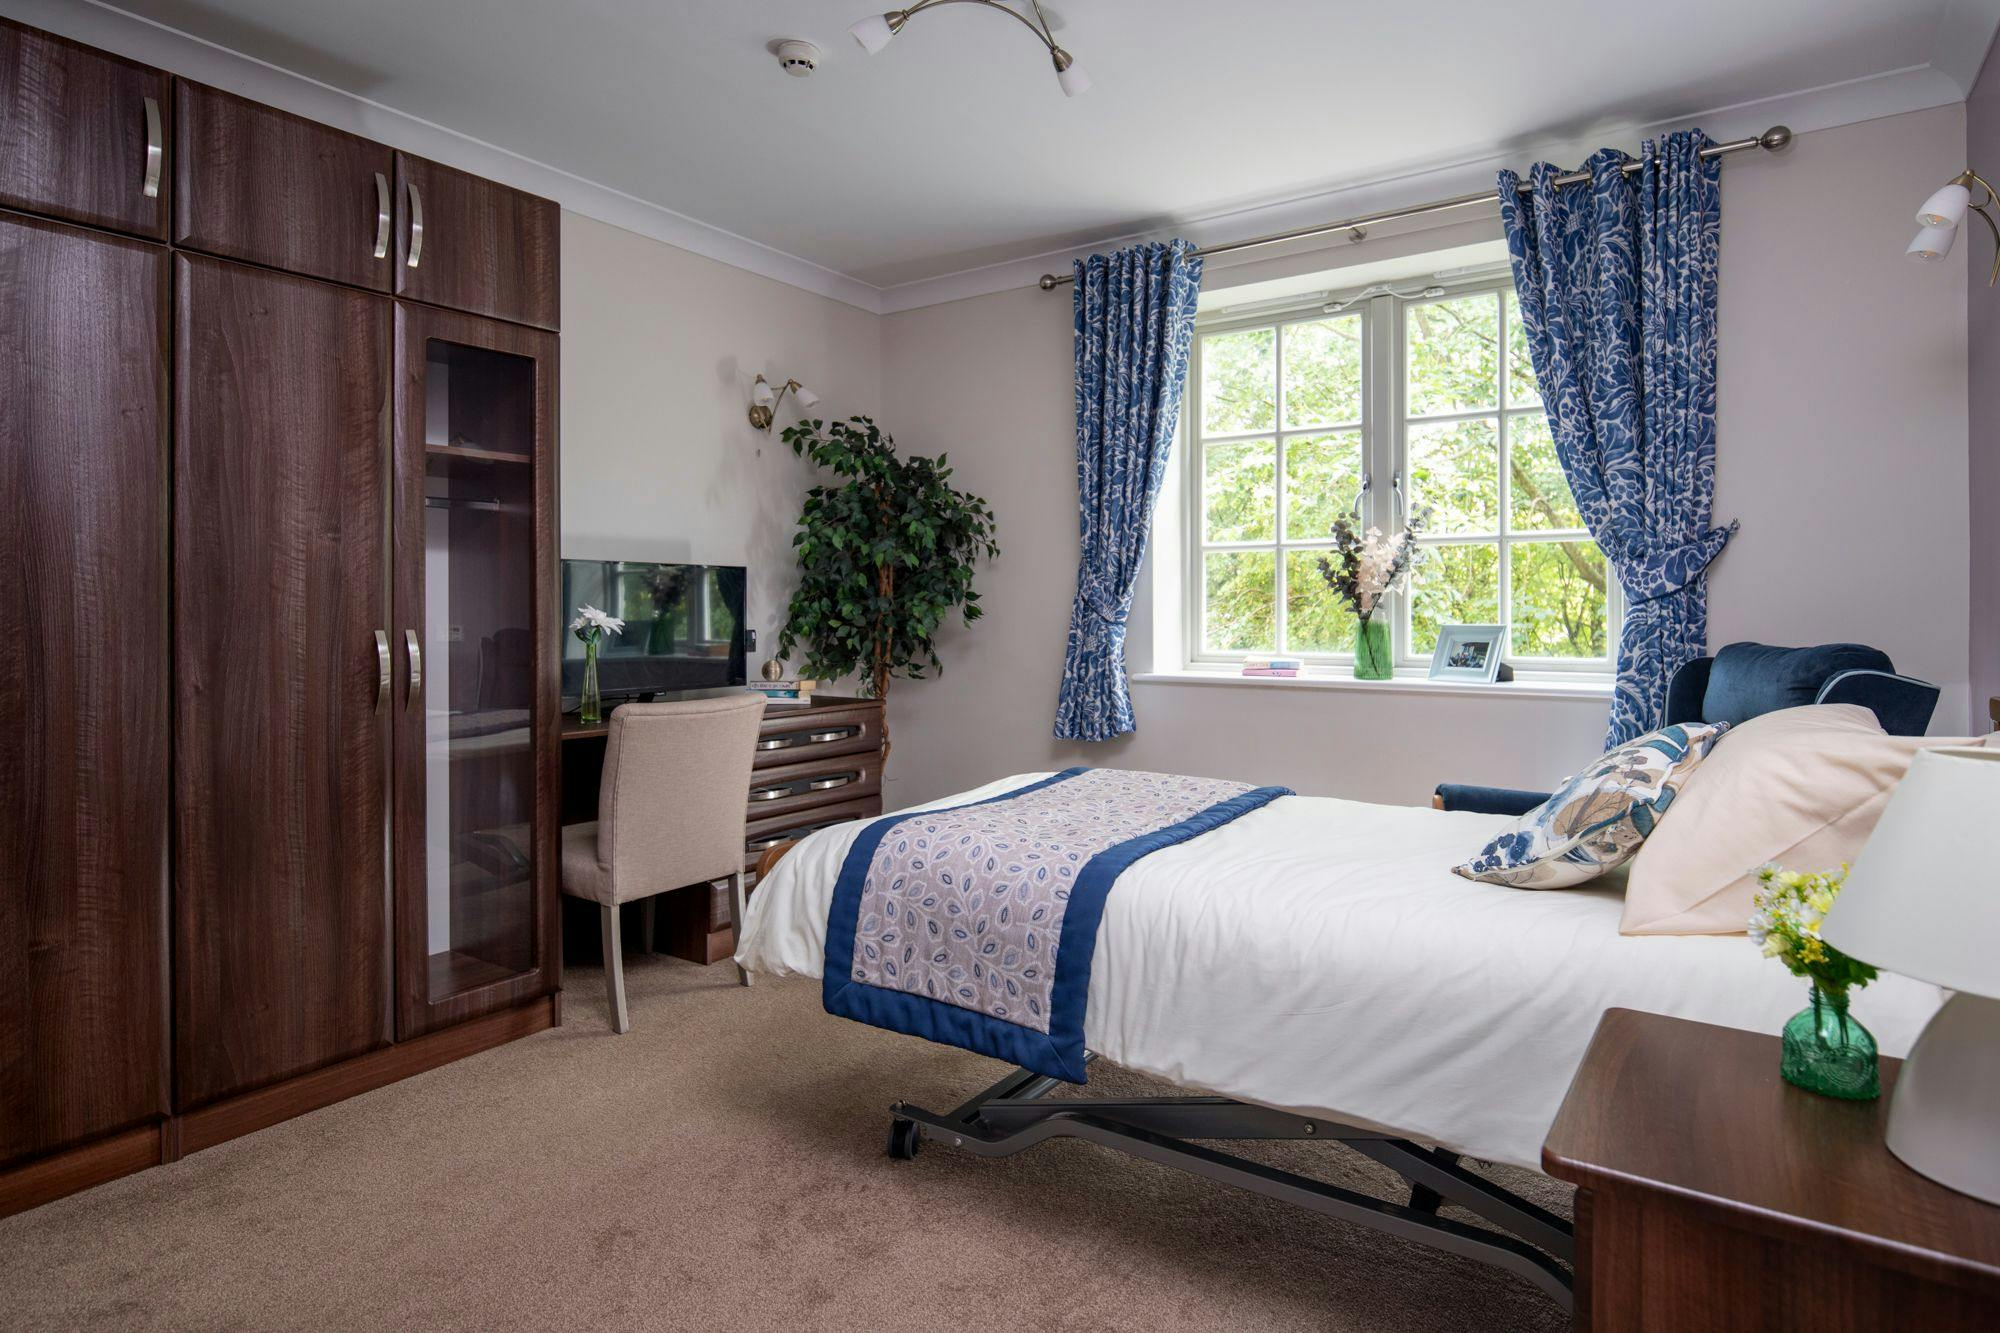 Bedroom at Edwardstow Court Care Home in Stow-on-the-Wold, Cotswold